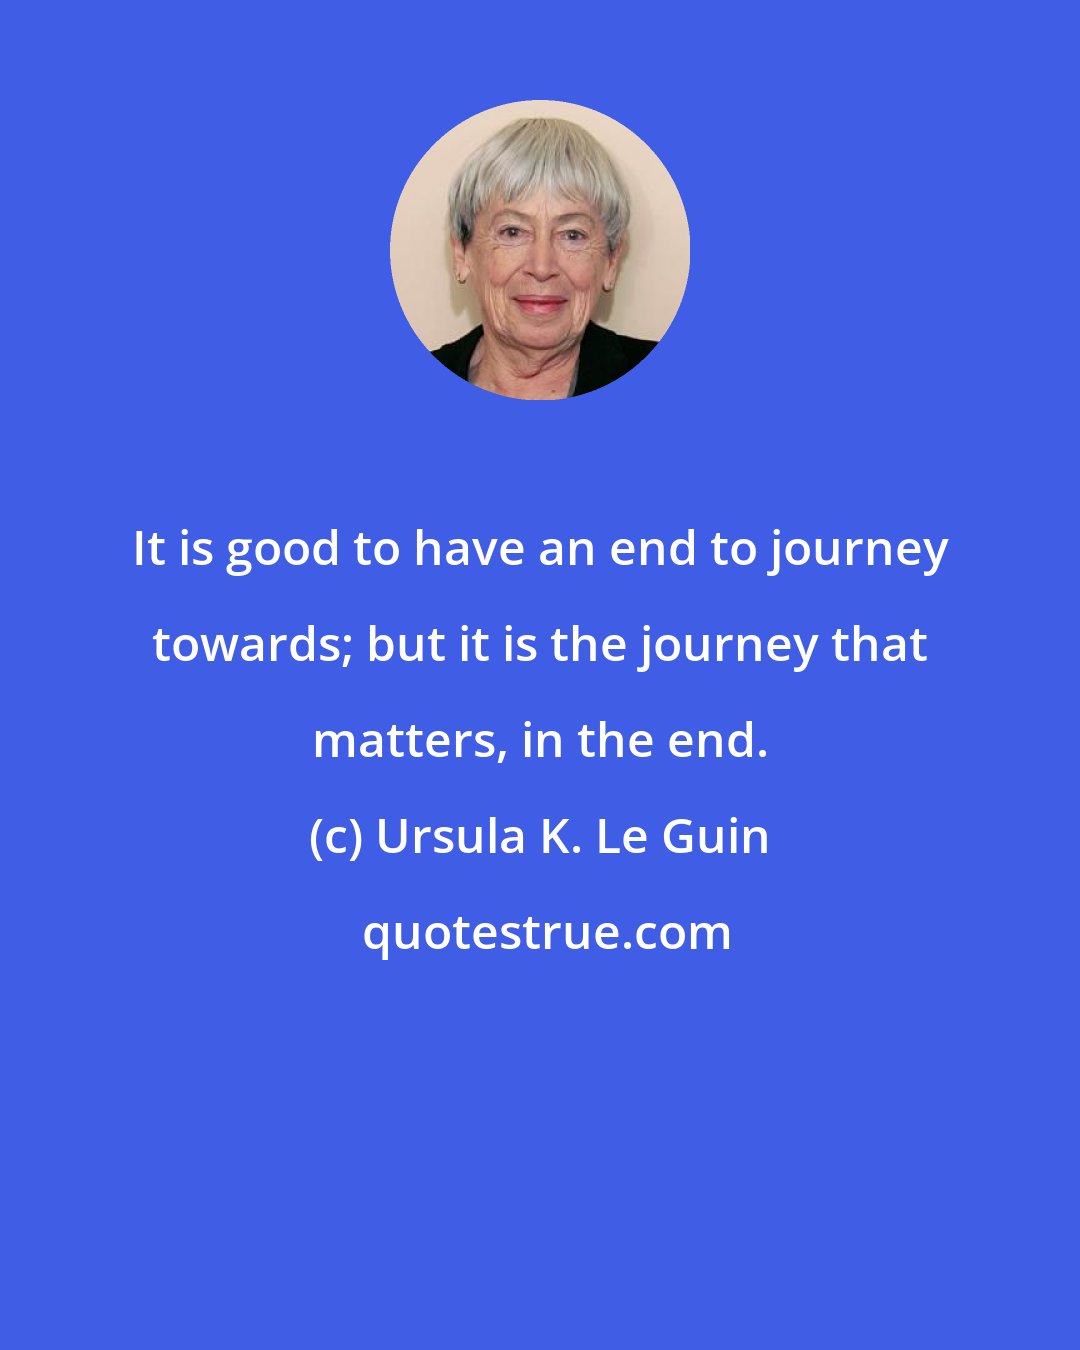 Ursula K. Le Guin: It is good to have an end to journey towards; but it is the journey that matters, in the end.